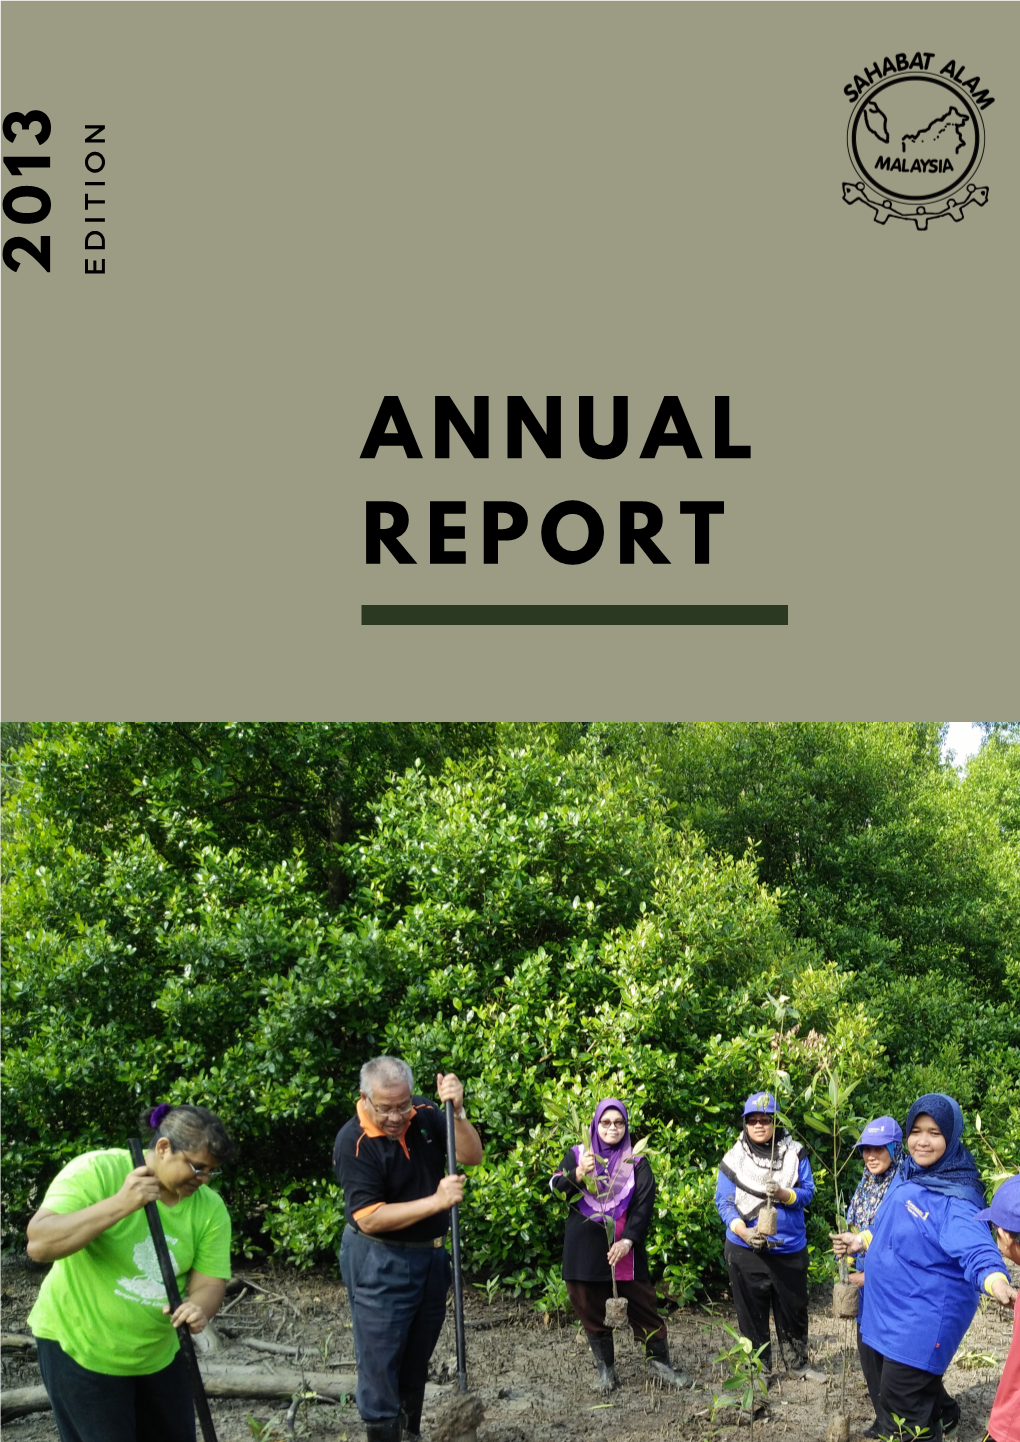 Annual Report Sahabat Alam Malaysia Report of Activities from January to December 2013